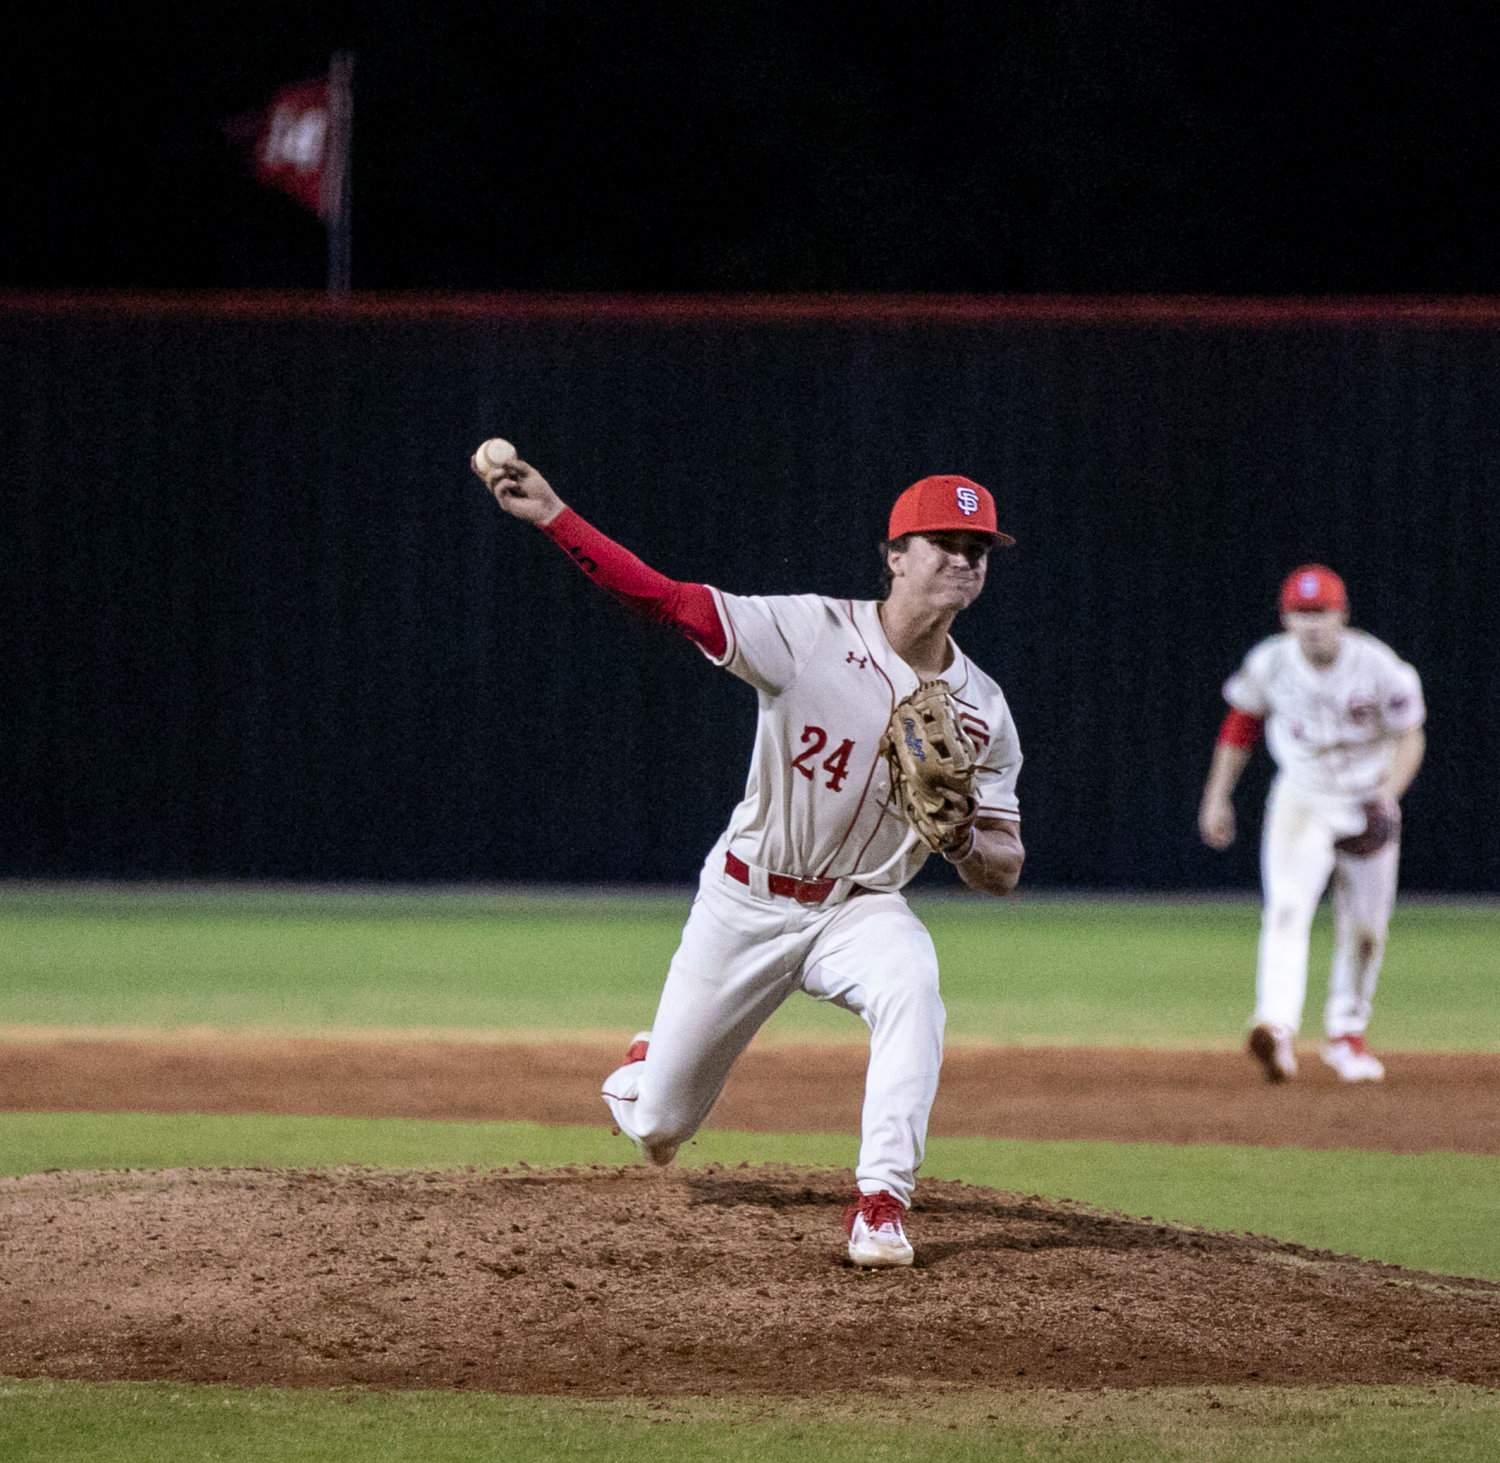 Spanish Fort senior Jack Holley fires a pitch during his relief outing Opening Day at home Thursday, Feb. 16. Holley came up with the go-ahead, two-RBI double in the fifth that helped the Toros take down St. Paul’s by a 7-4 score.